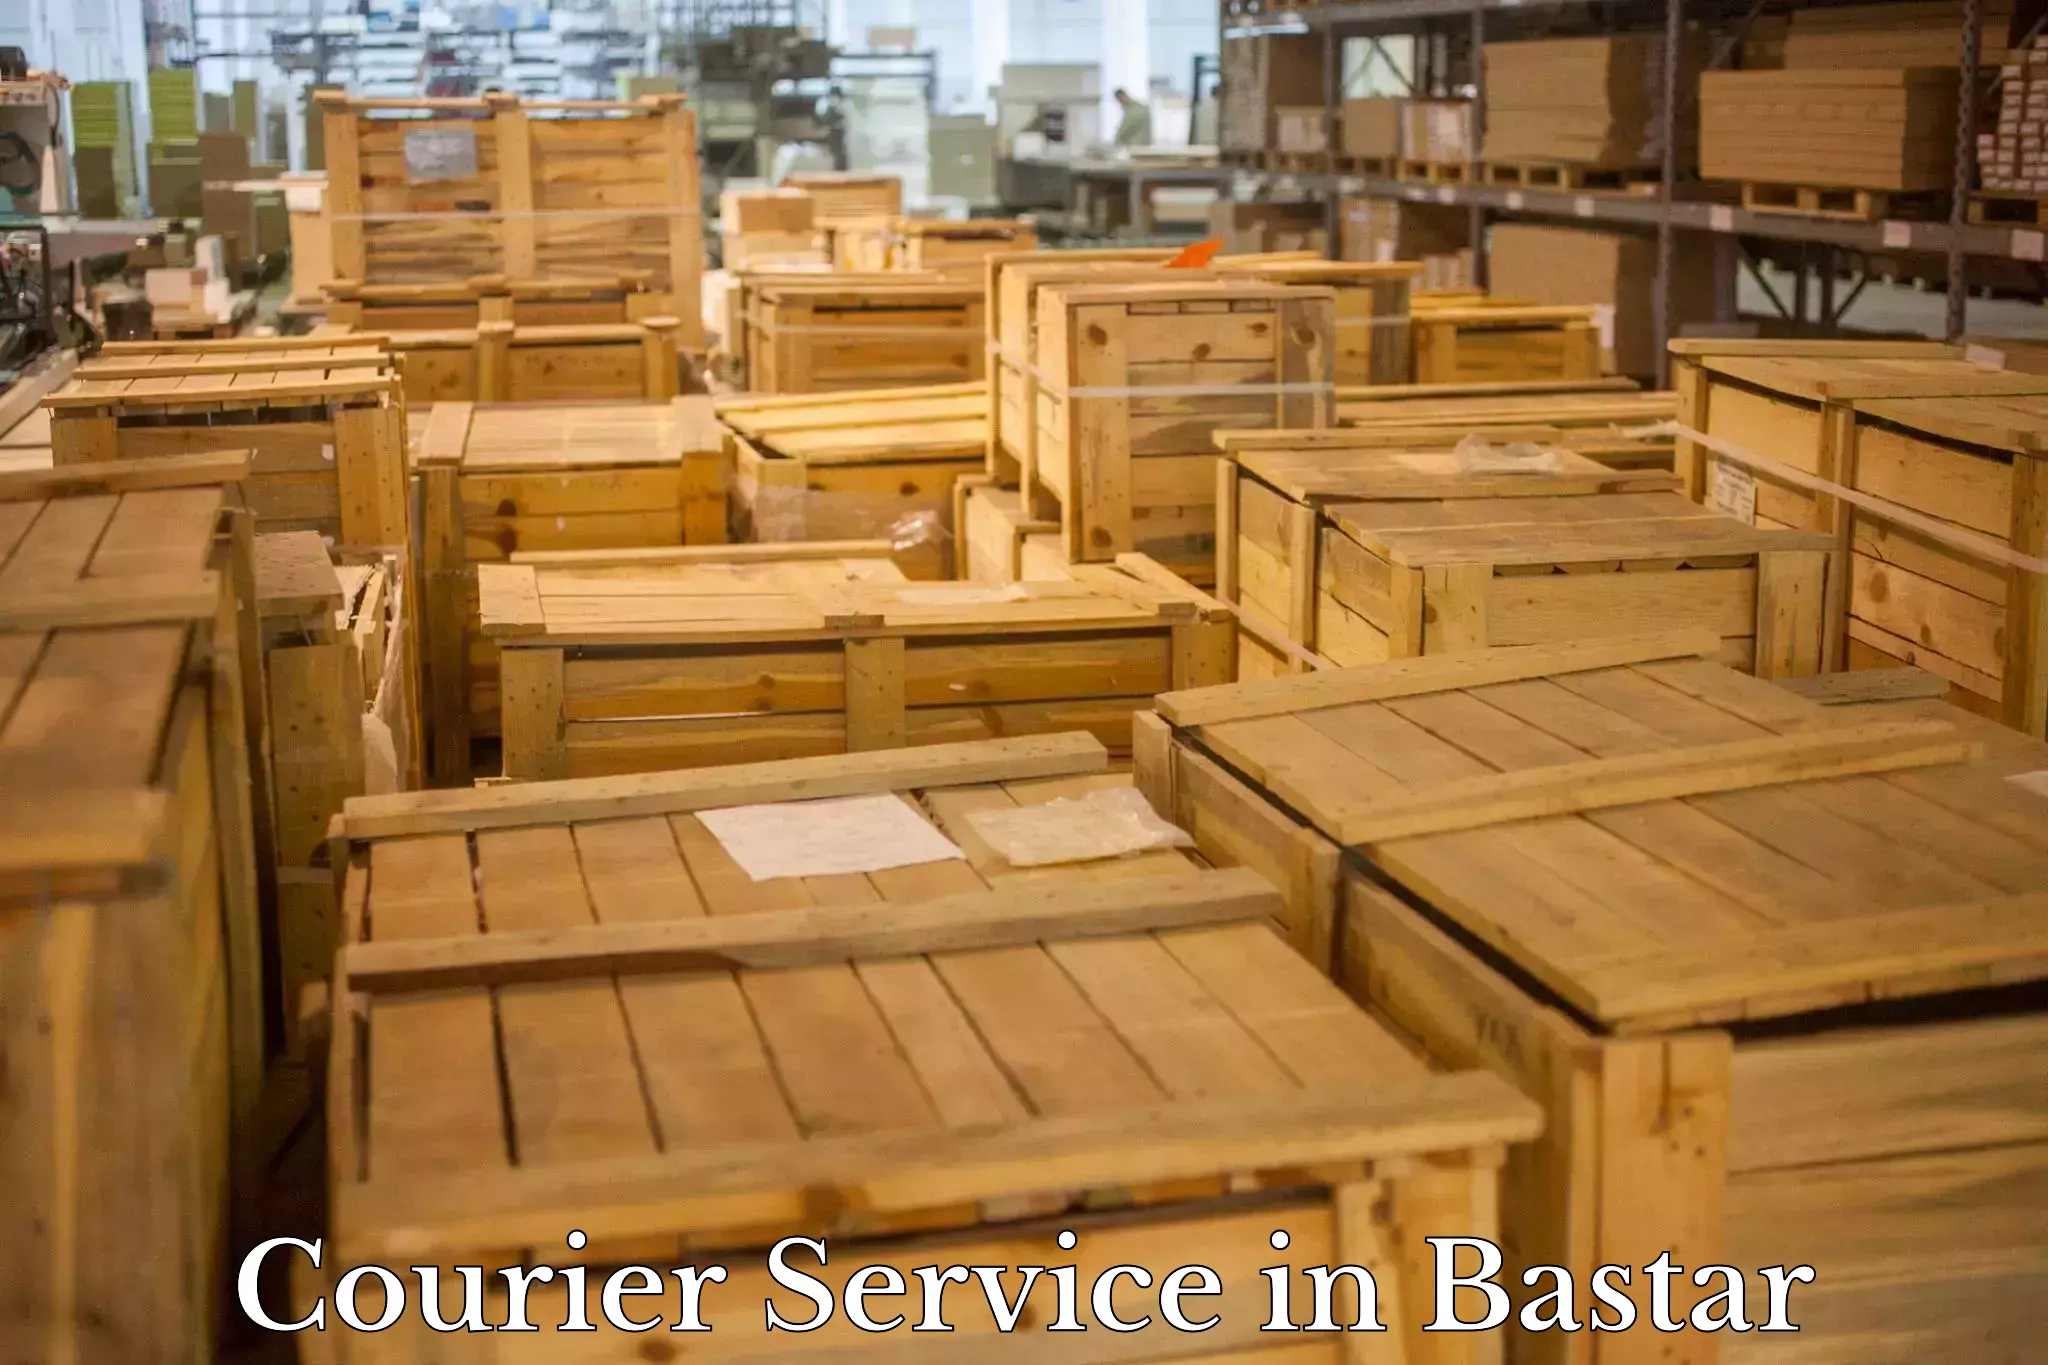 State-of-the-art courier technology in Bastar